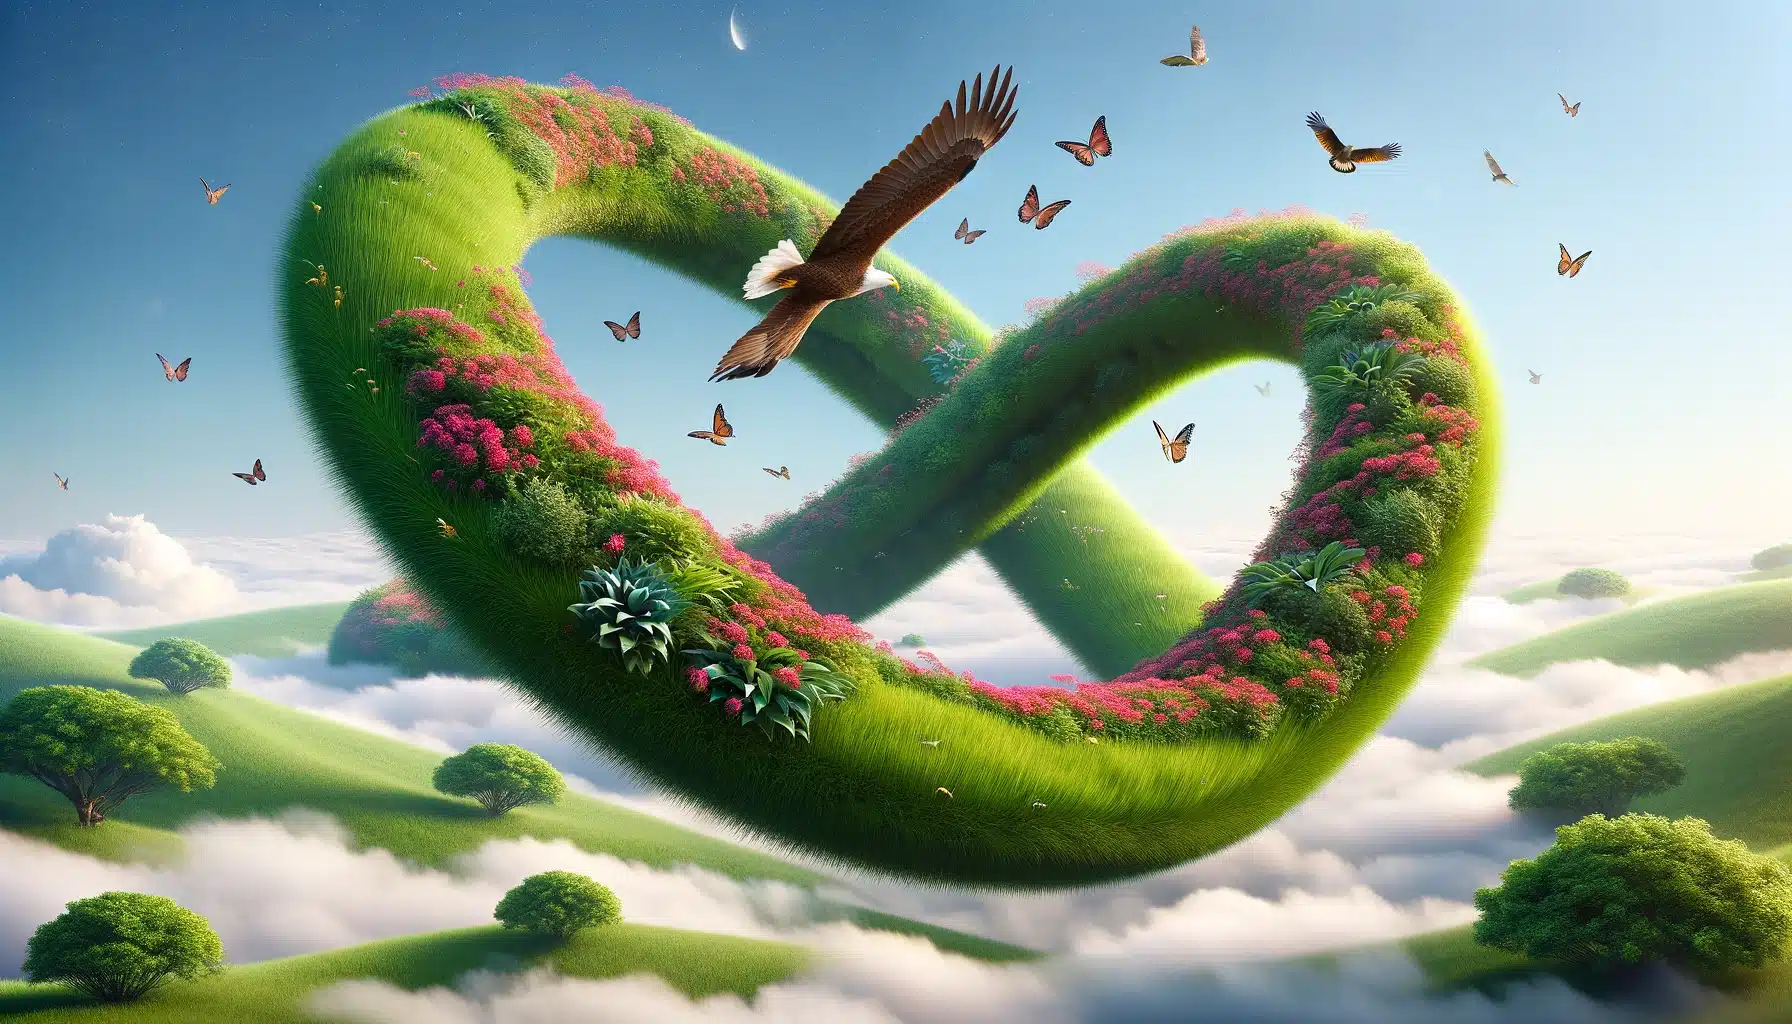 A Möbius strip landscape with lush greenery and vibrant pink flowers, featuring butterflies and an eagle in flight, exemplifying the use for creative compositions.